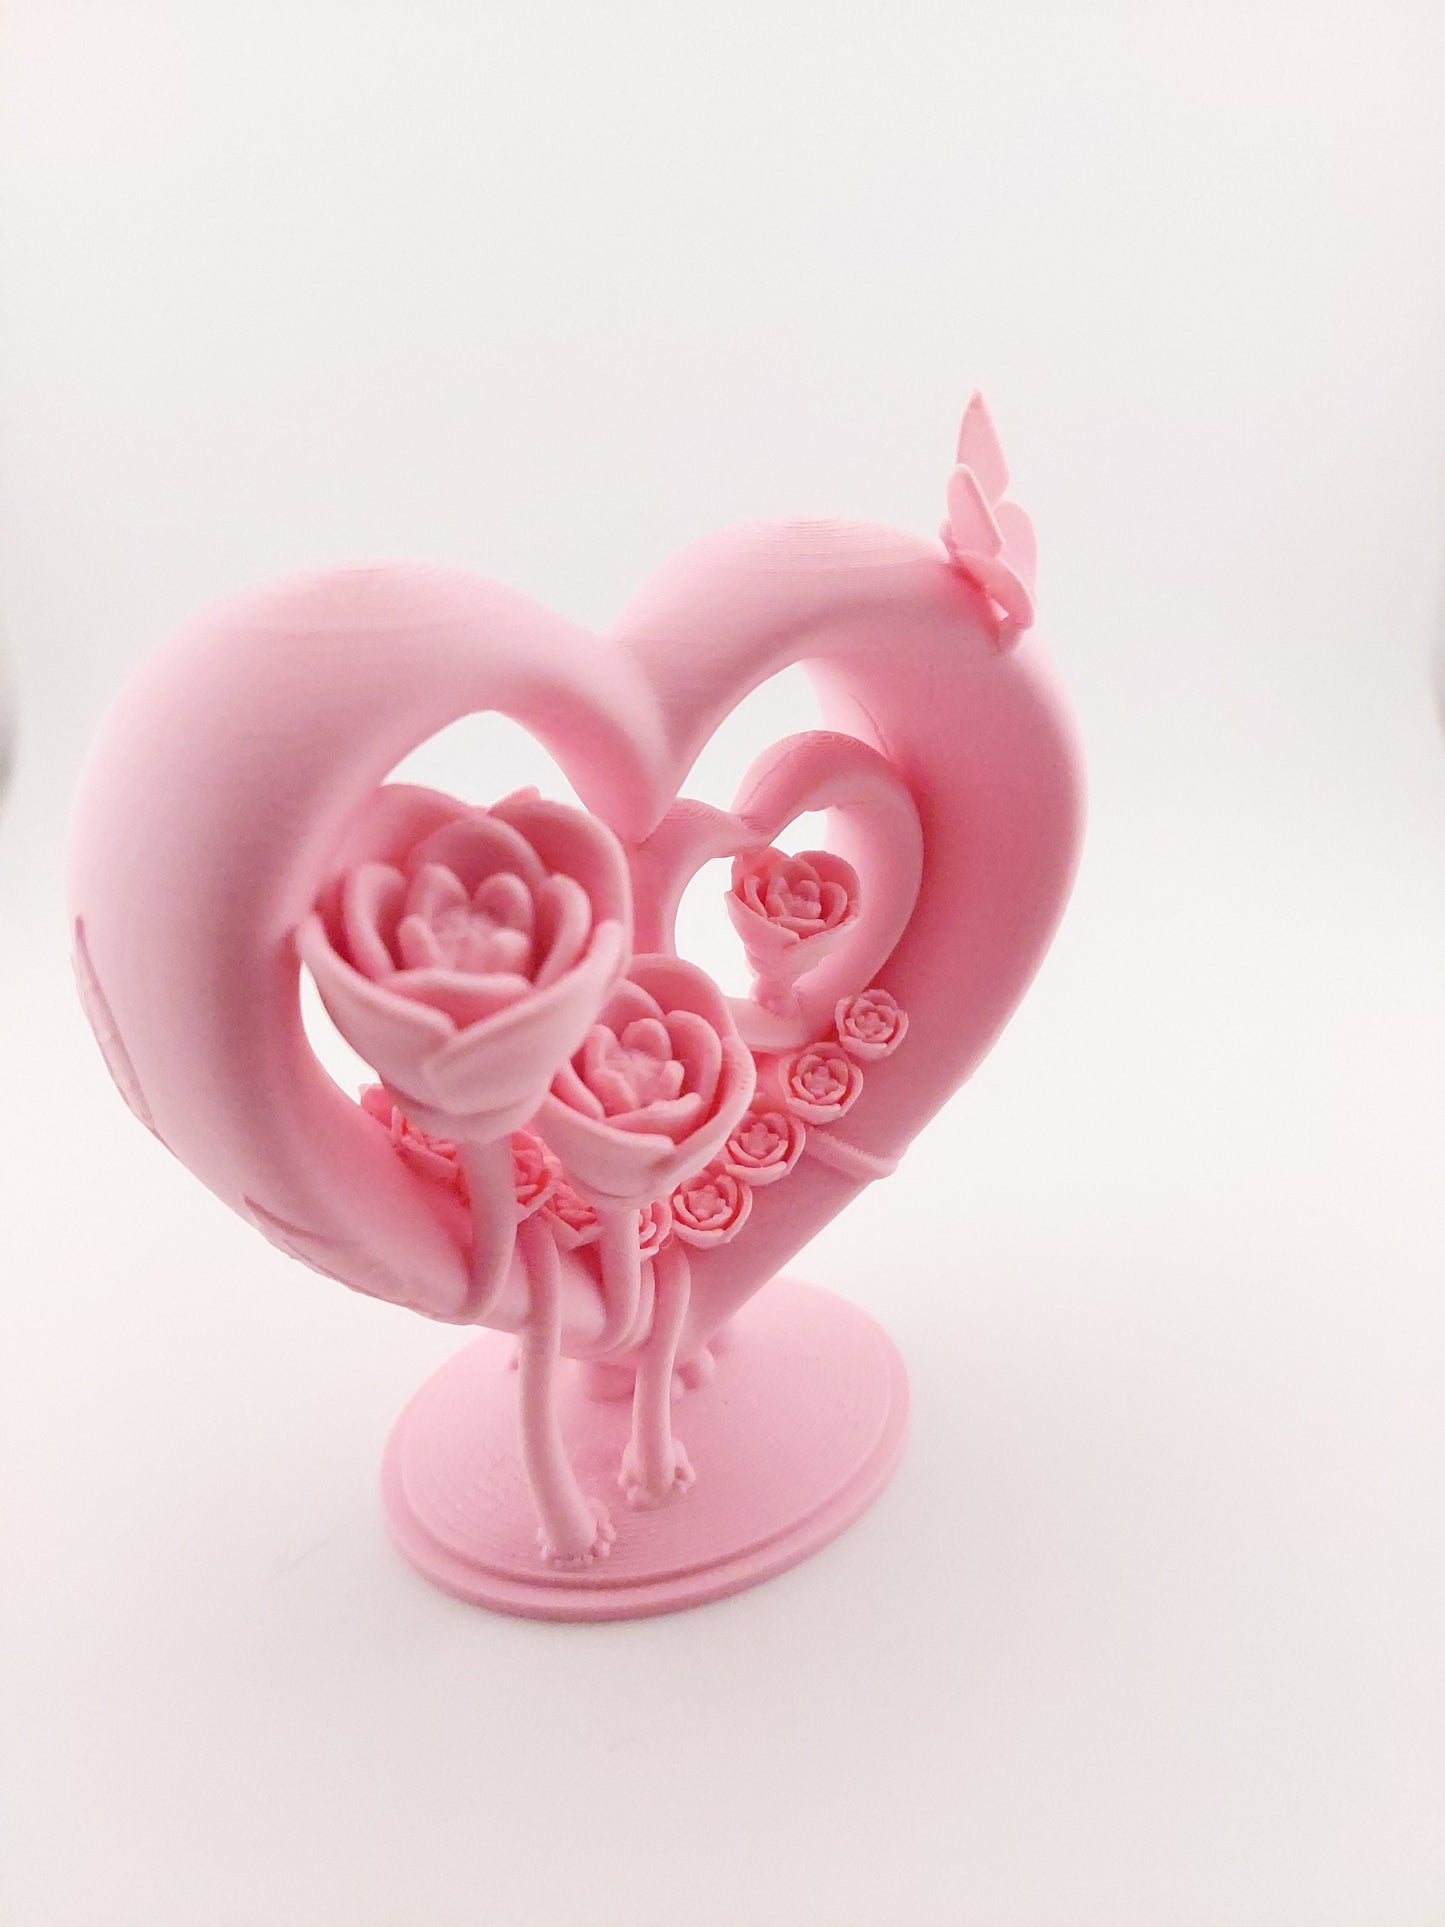 1 Valentine's Heart Figurine -- Decor Gift - 3D Printed Holiday Heart Love - Customizable Colors - Authorized Seller